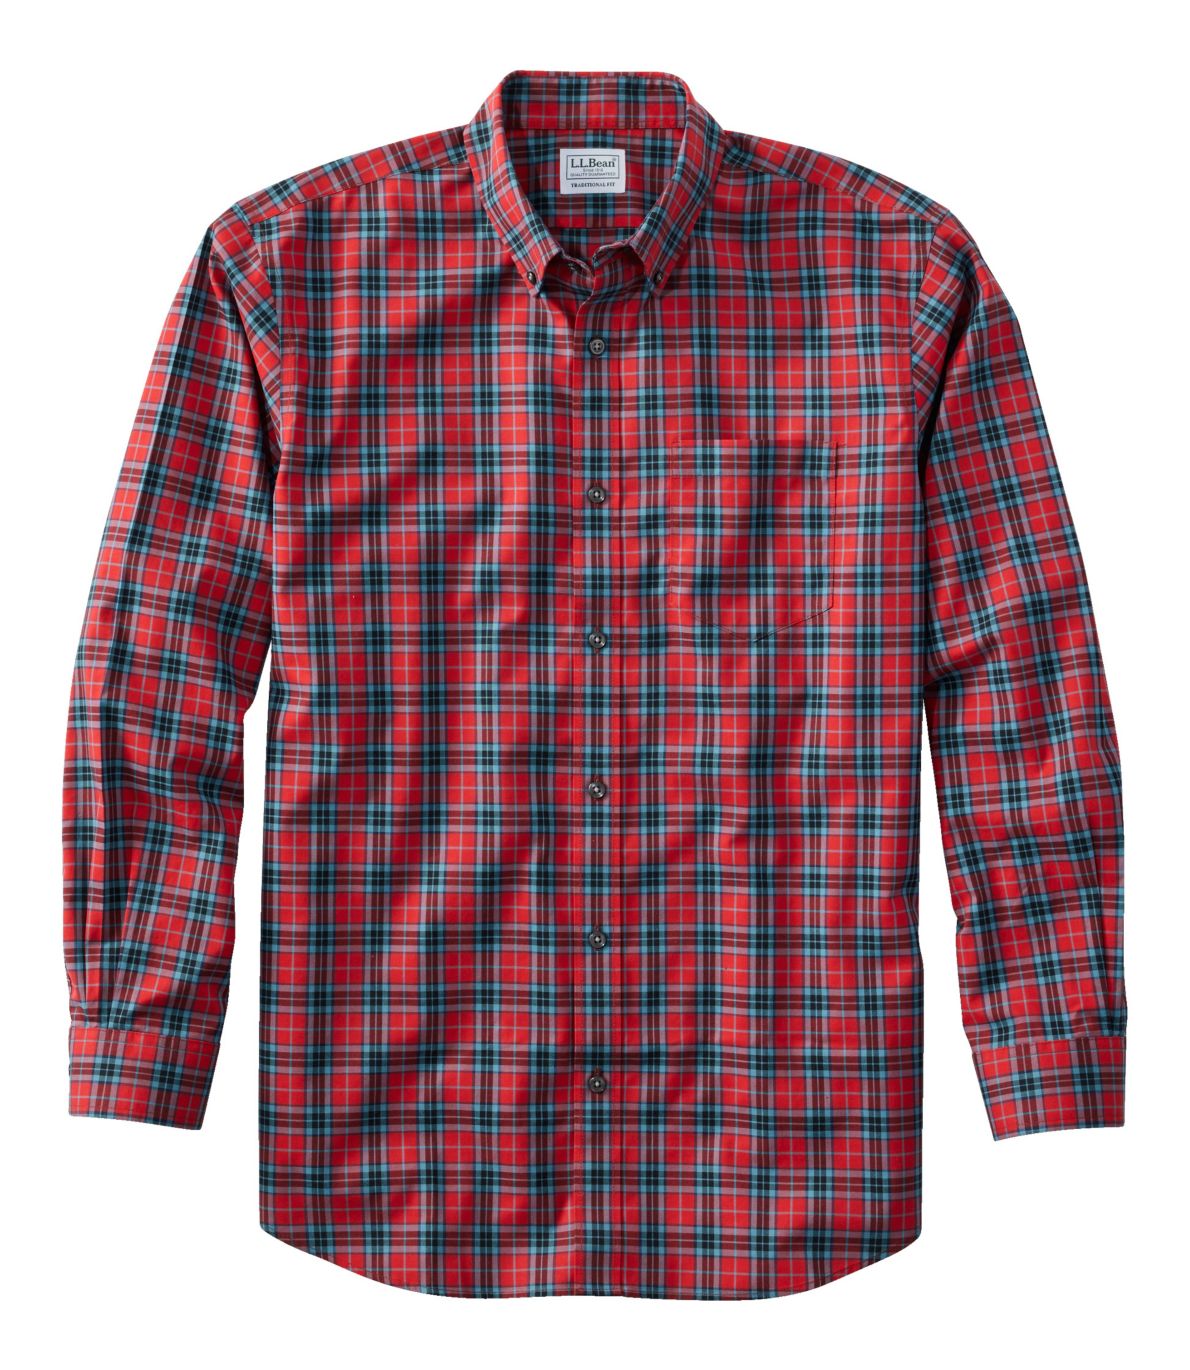 Men's Wrinkle-Free Kennebunk Sport Shirt, Traditional Fit Check